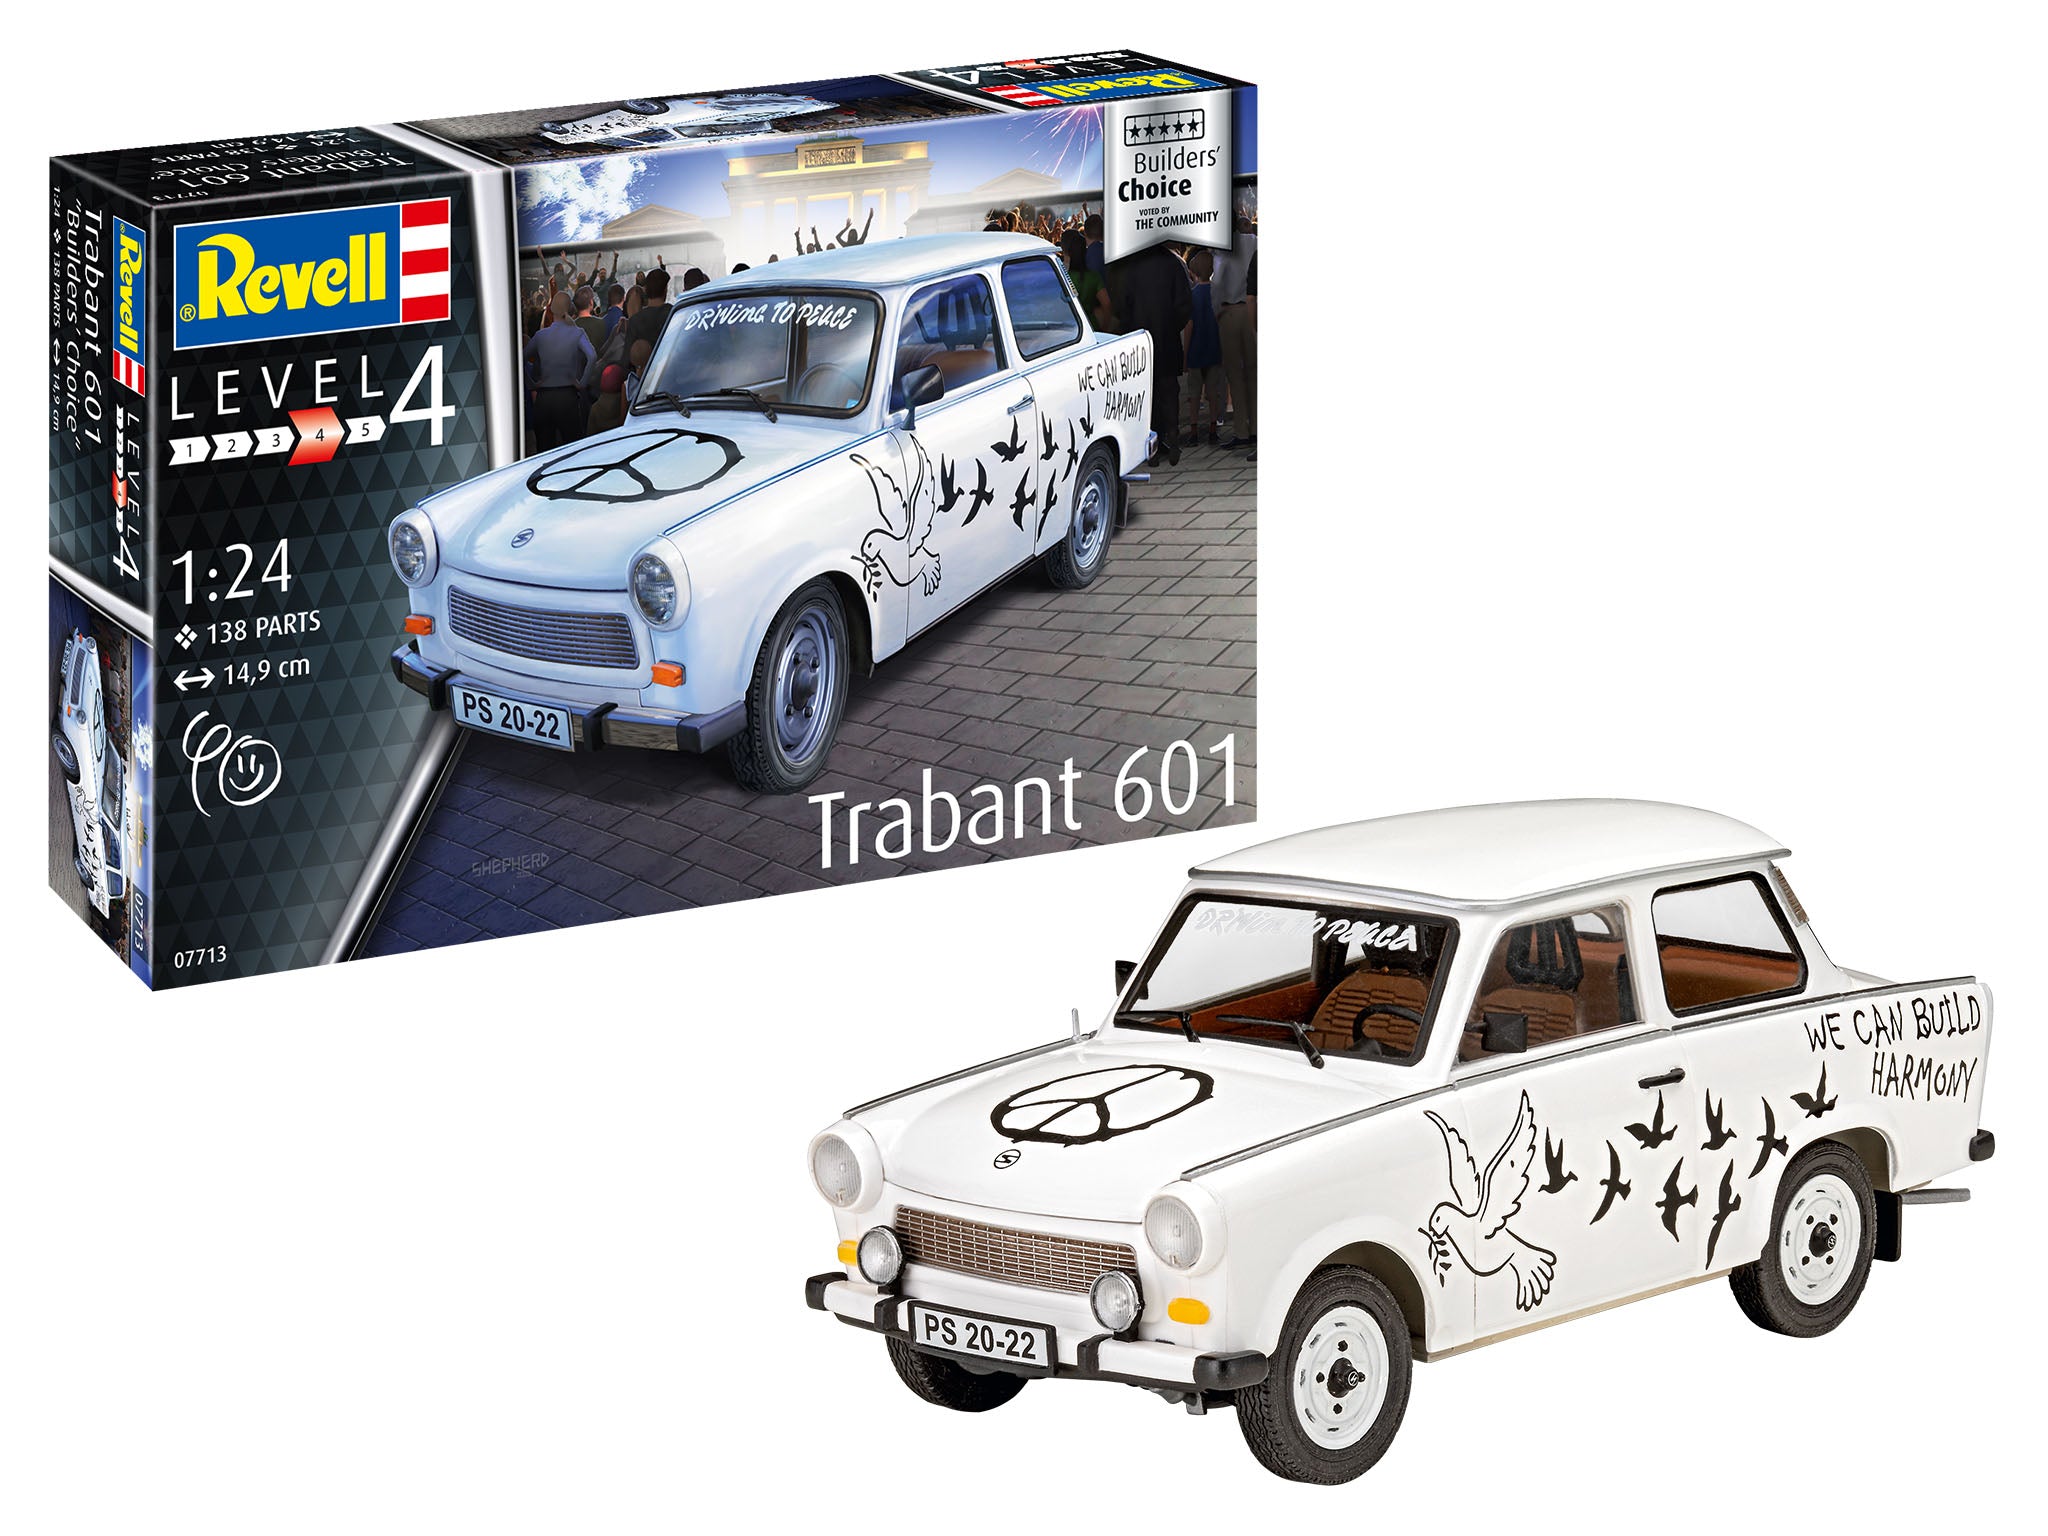 Revell Trabant 601S Builders Choice 1/24 07713